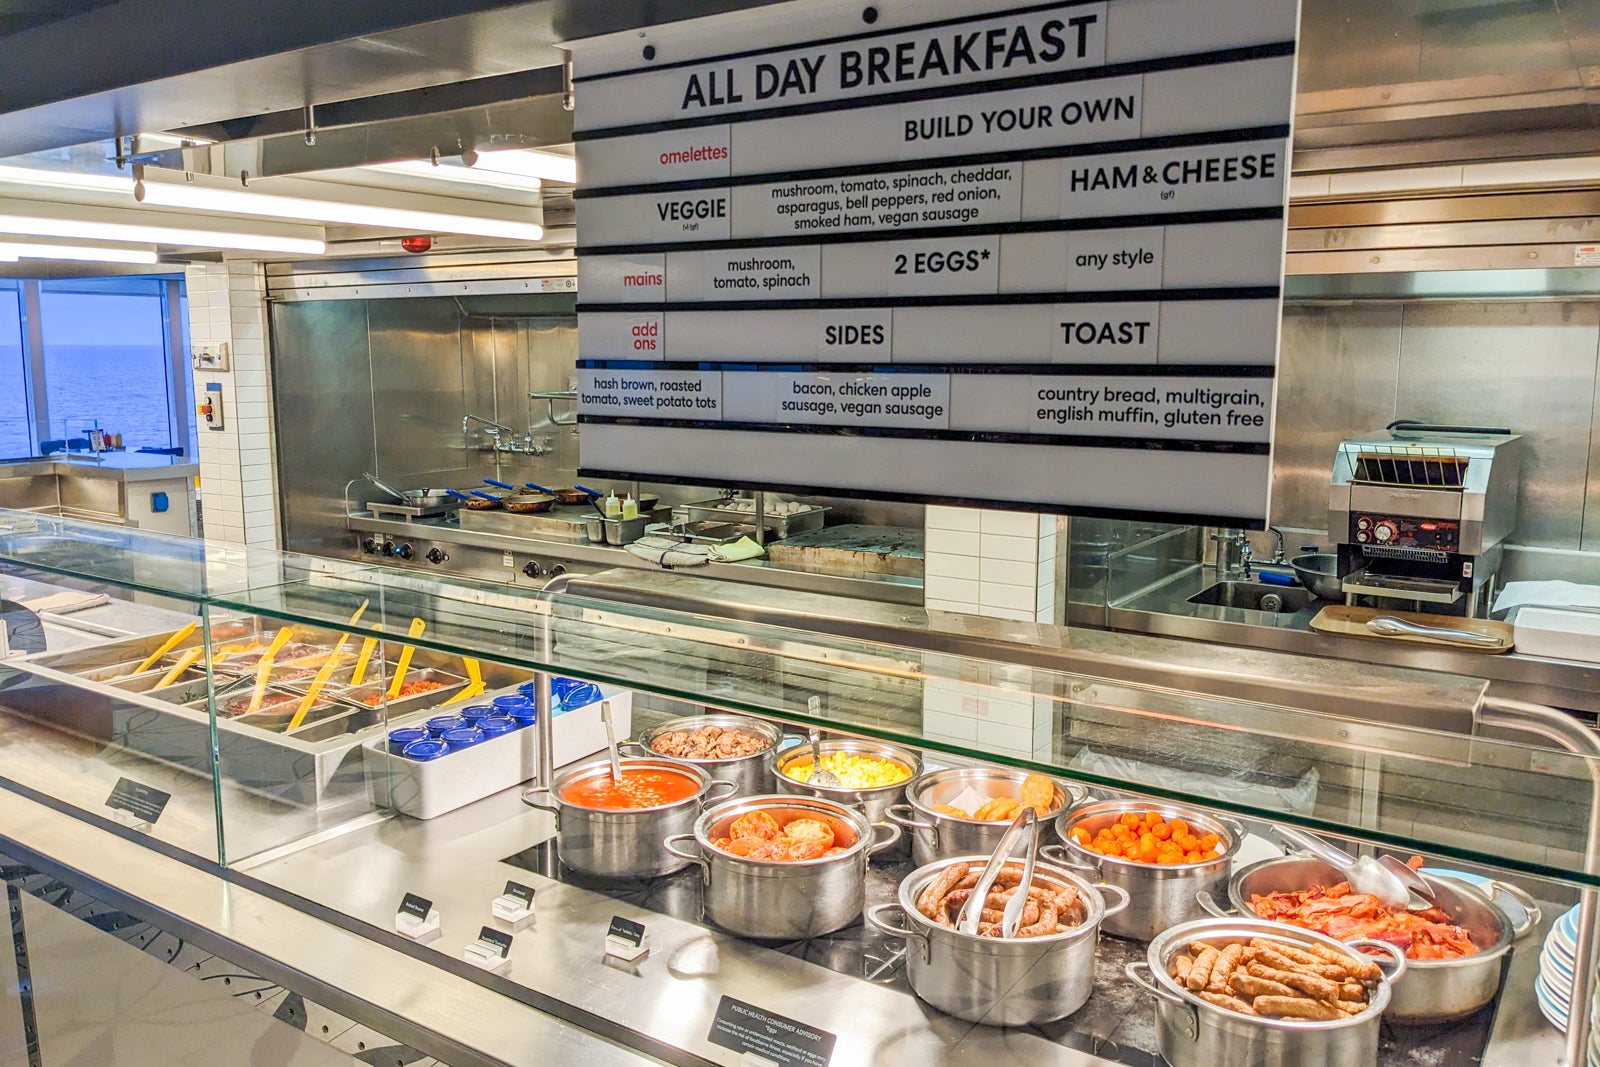 All Day Breakfast in Scarlet Lady's Galley food hall.